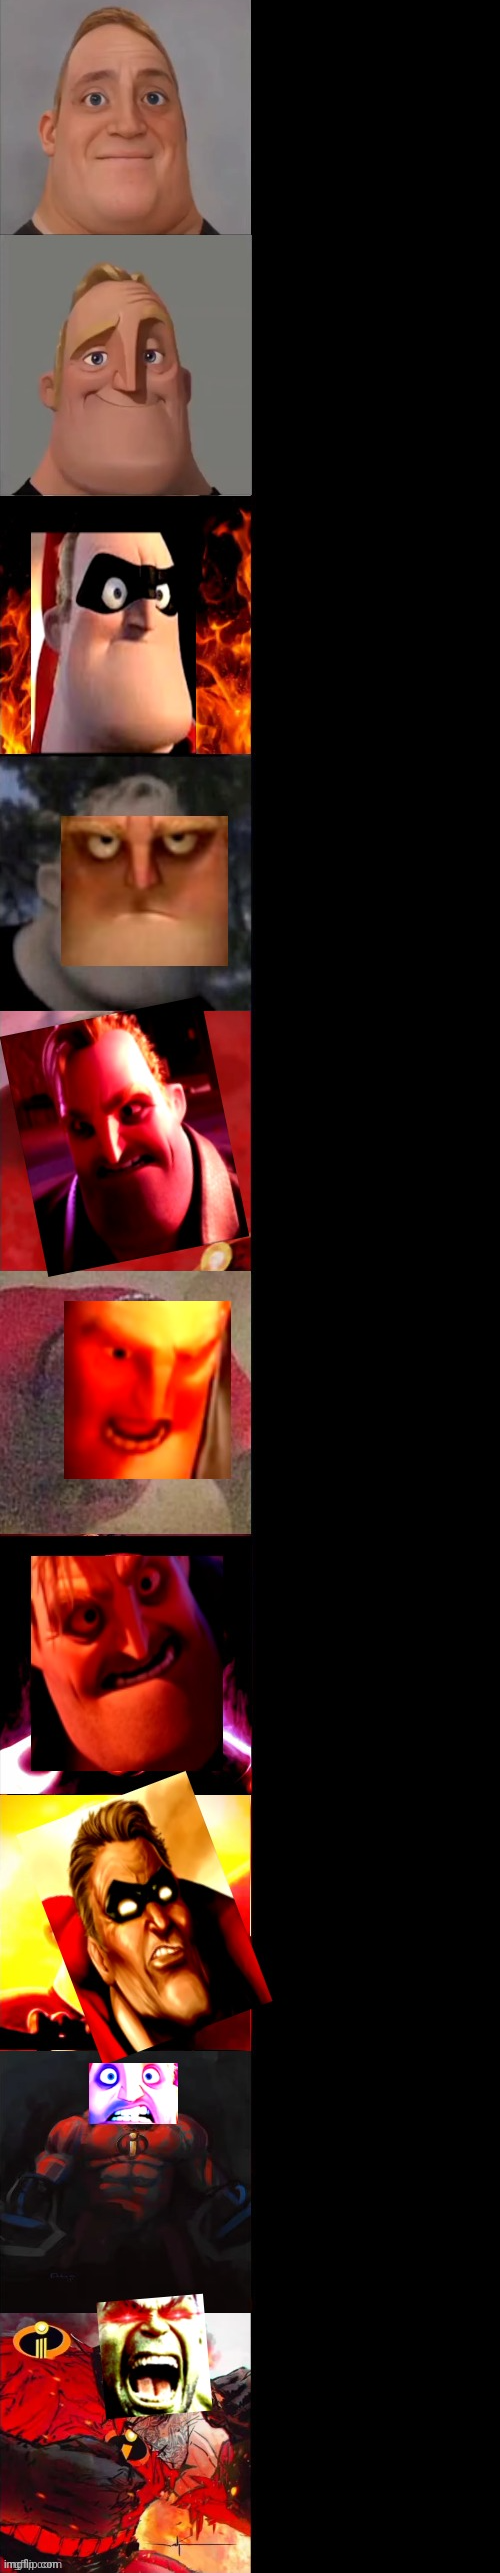 High Quality Mr incredible becoming Evil+angry Template Blank Meme Template